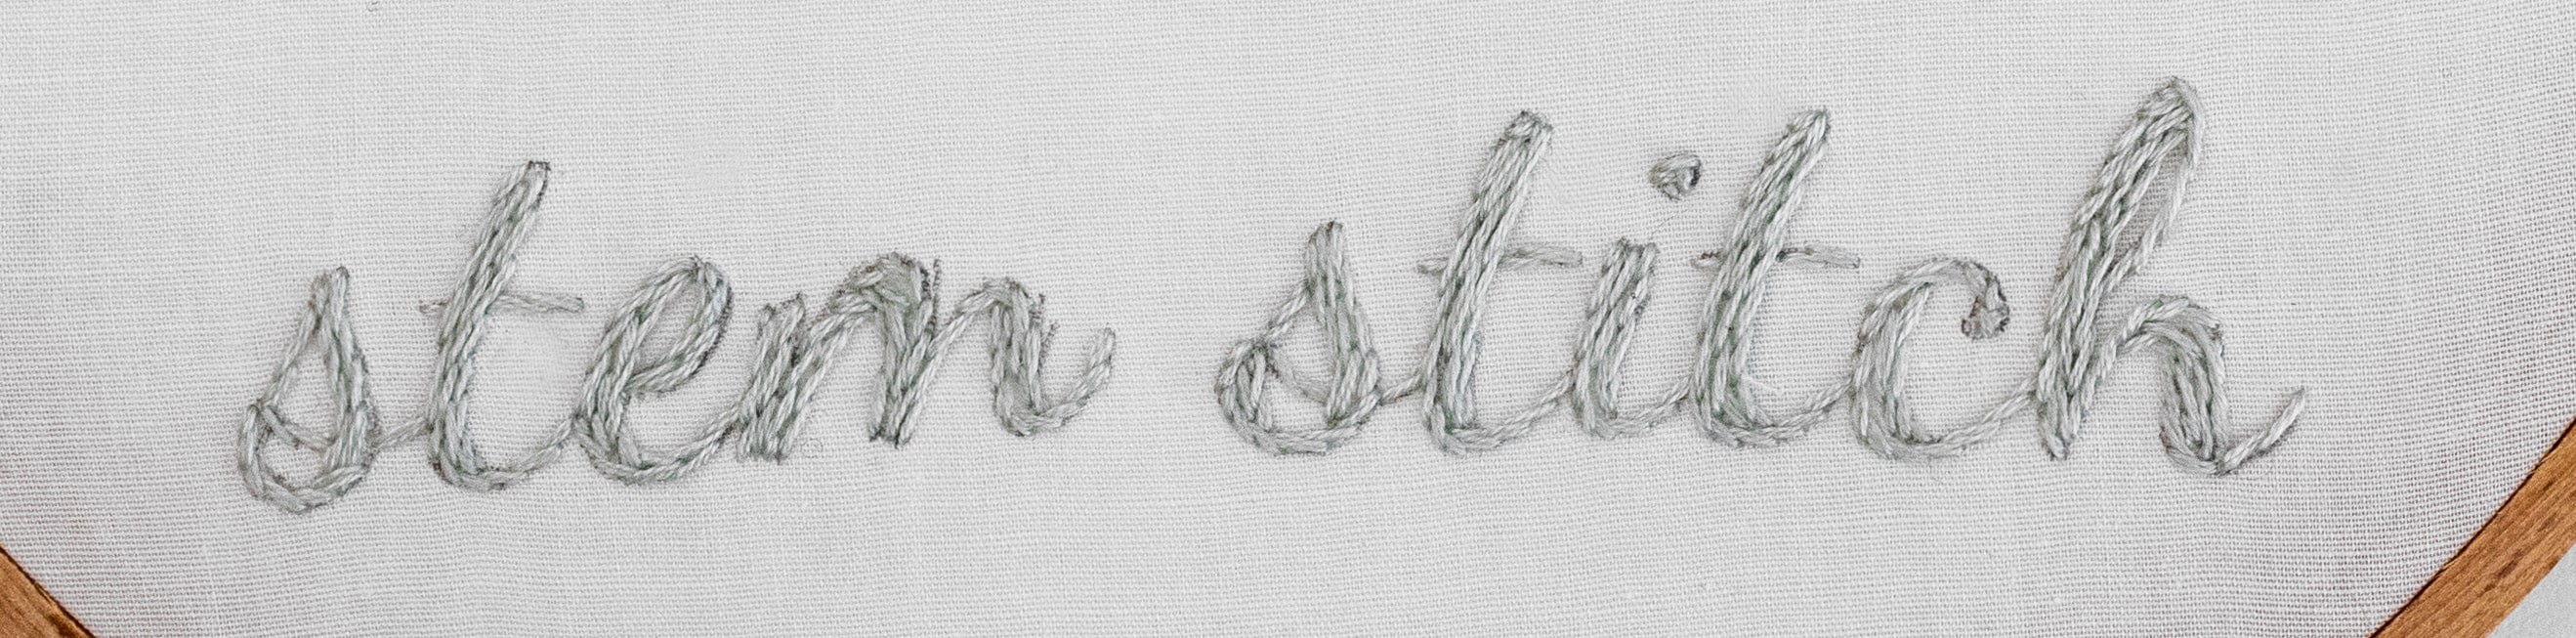 This image is of a word using stem stitch.